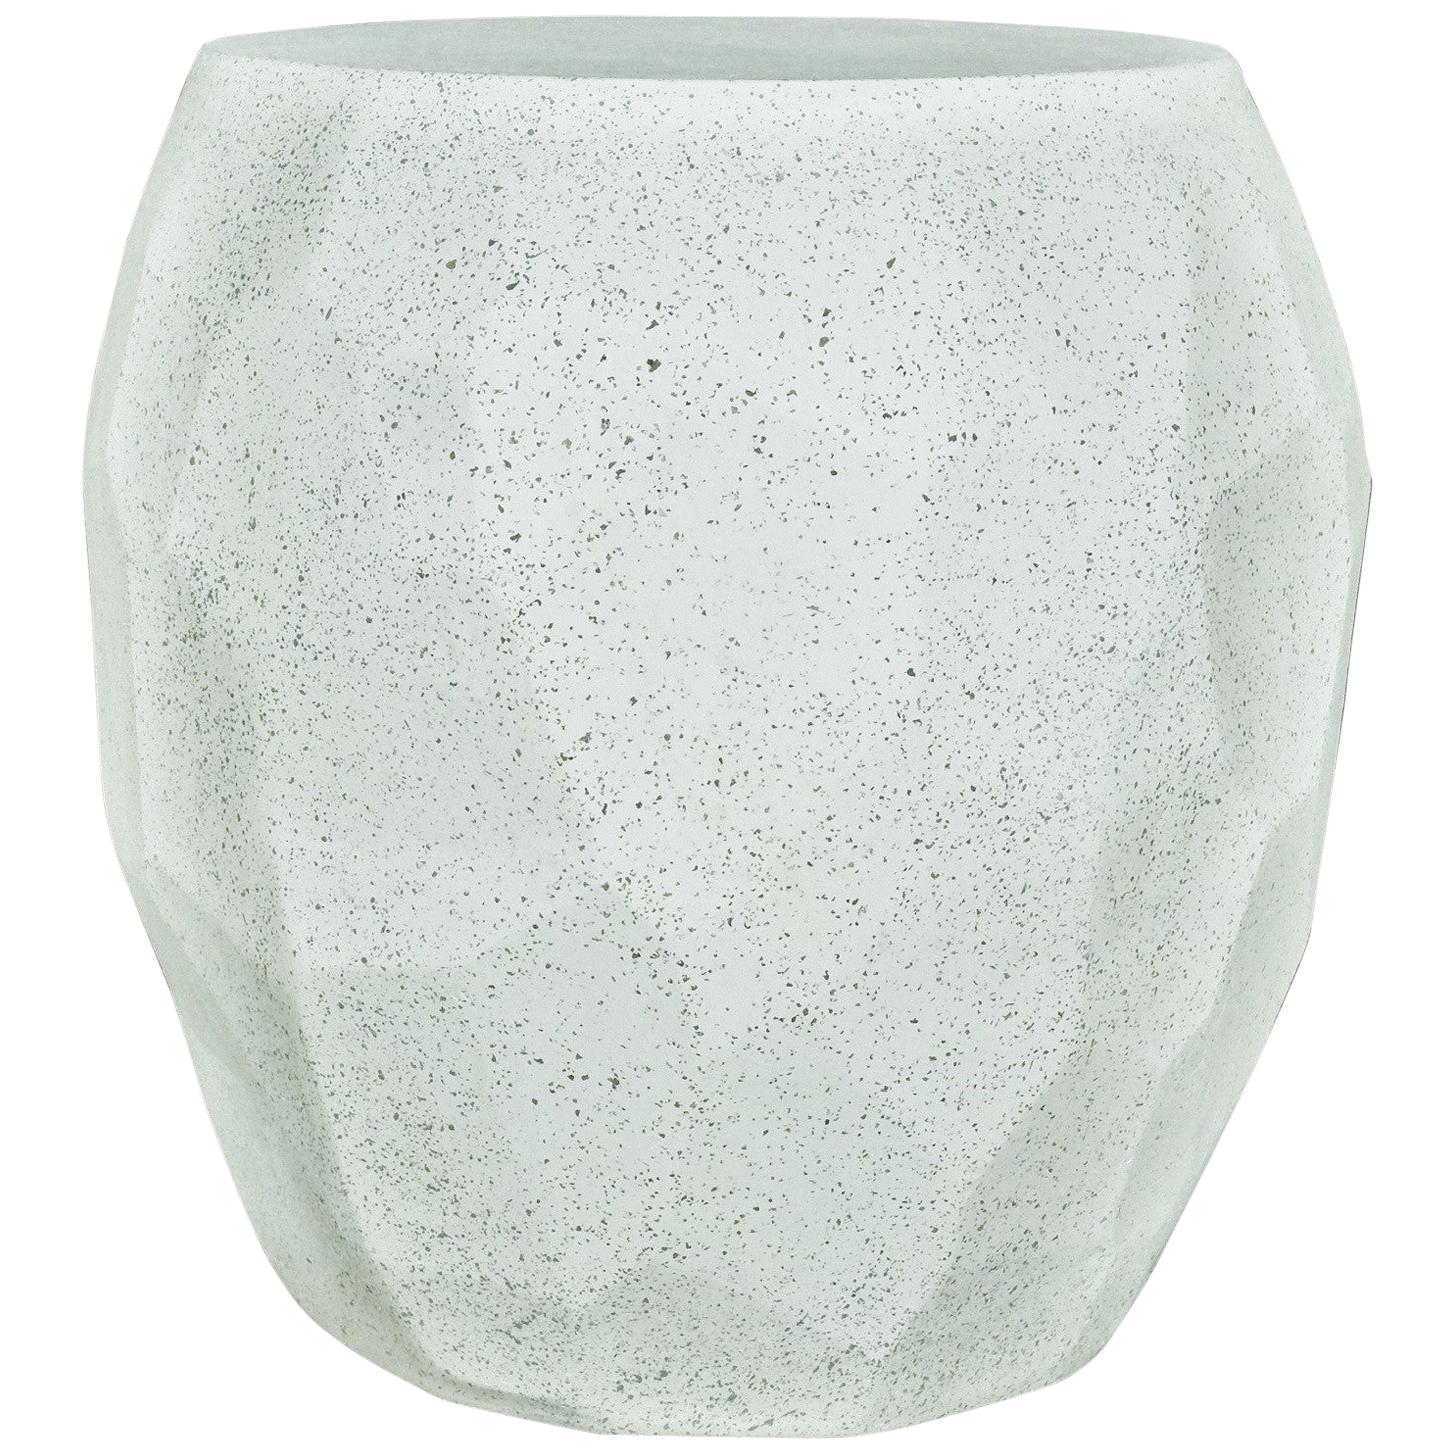 Cast Resin 'Facet' Side Table, Natural Stone Finish by Zachary A. Design For Sale